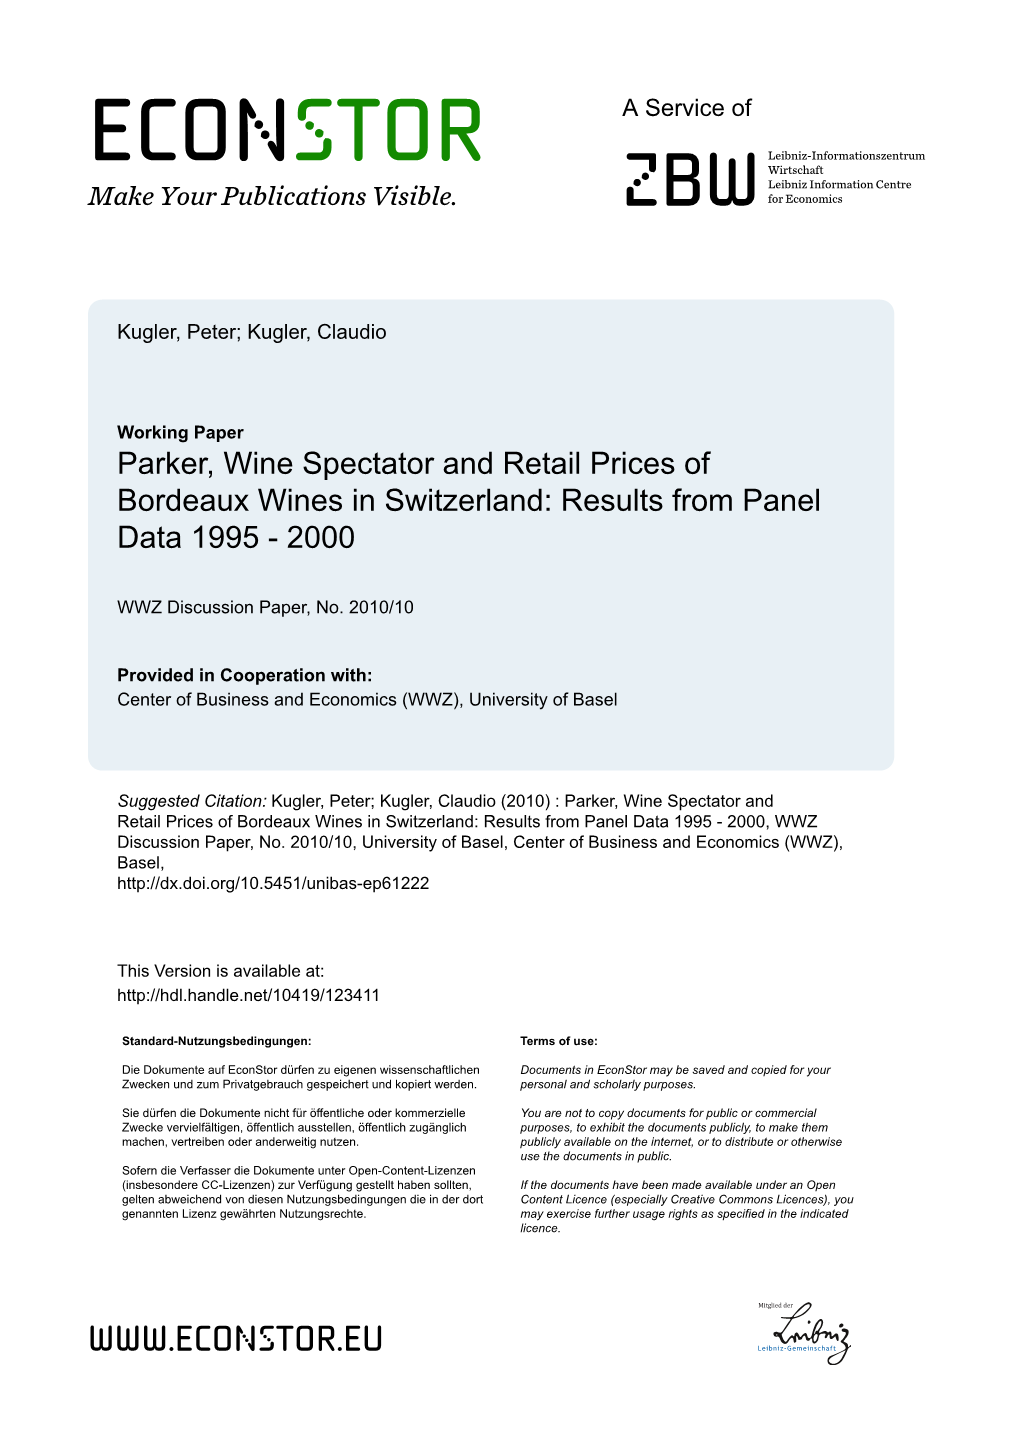 Parker, Wine Spectator and Retail Prices of Bordeaux Wines in Switzerland: Results from Panel Data 1995 - 2000